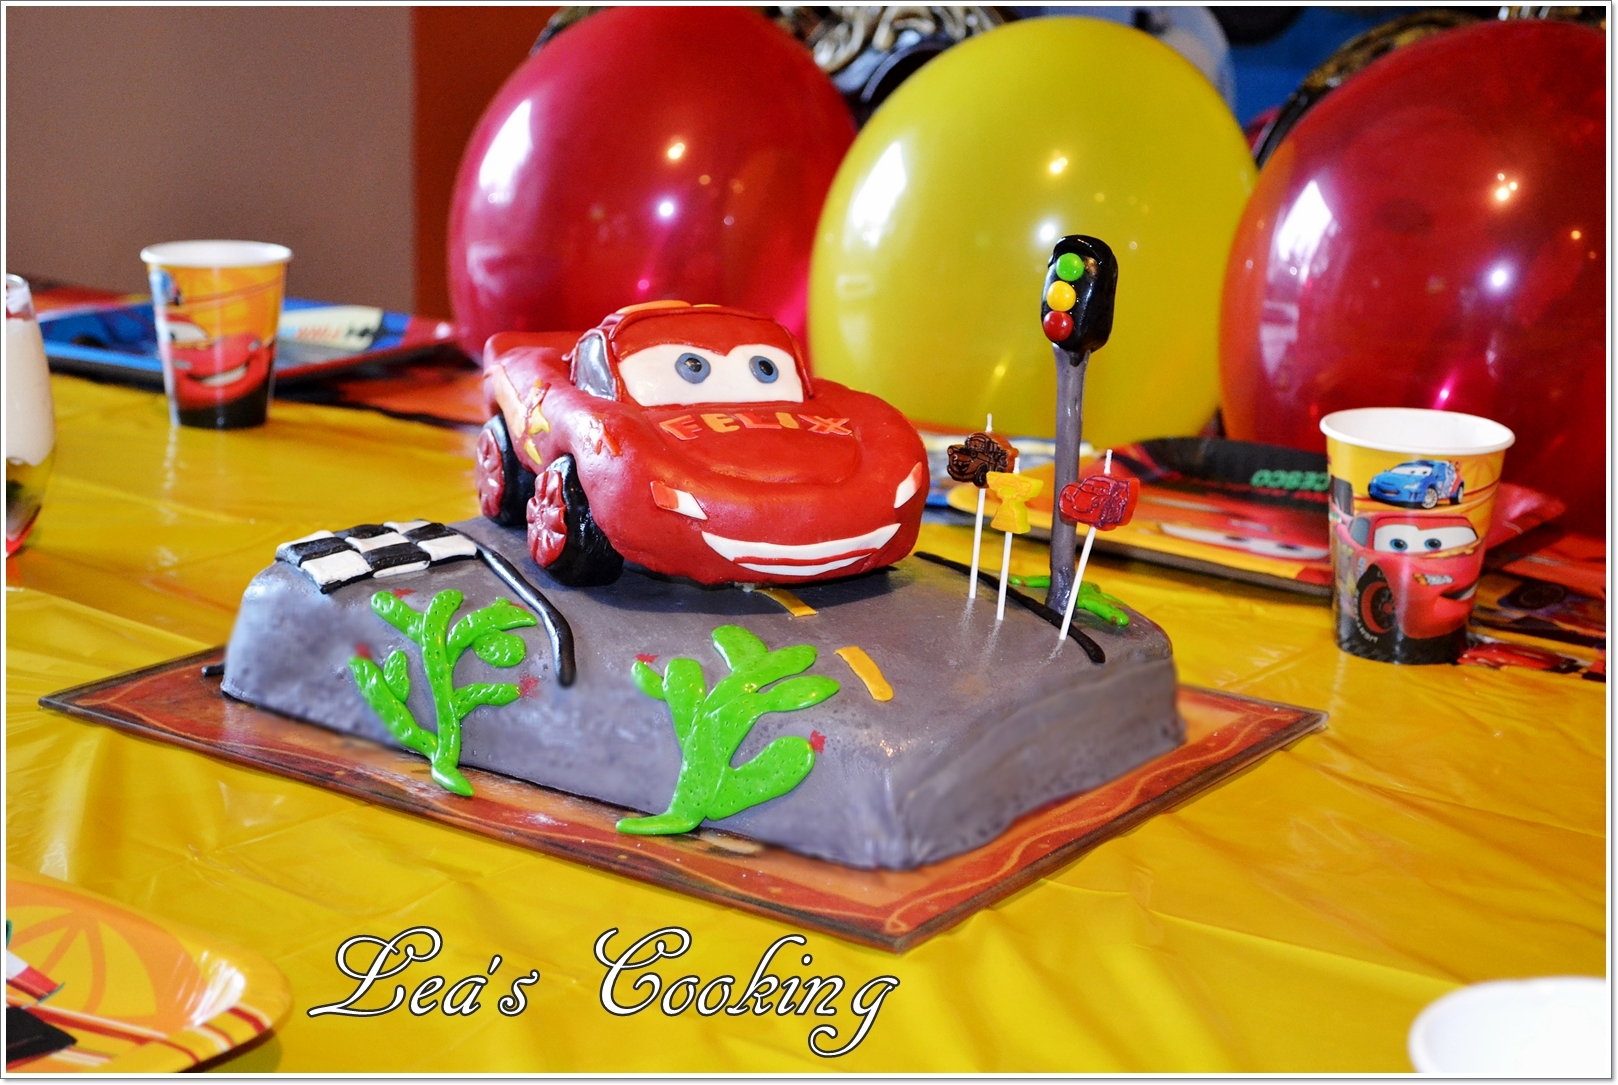 Make a car cake by following these step-by-step instructions. Inspired by Lightning McQueen from the Disney Movie "Cars". Make your kid's birthday cake special. I have a tutorial posted on my blog http://leascooking.blogspot.com/2013/01/cars-lightning-mcqueen-cake-topper.html.